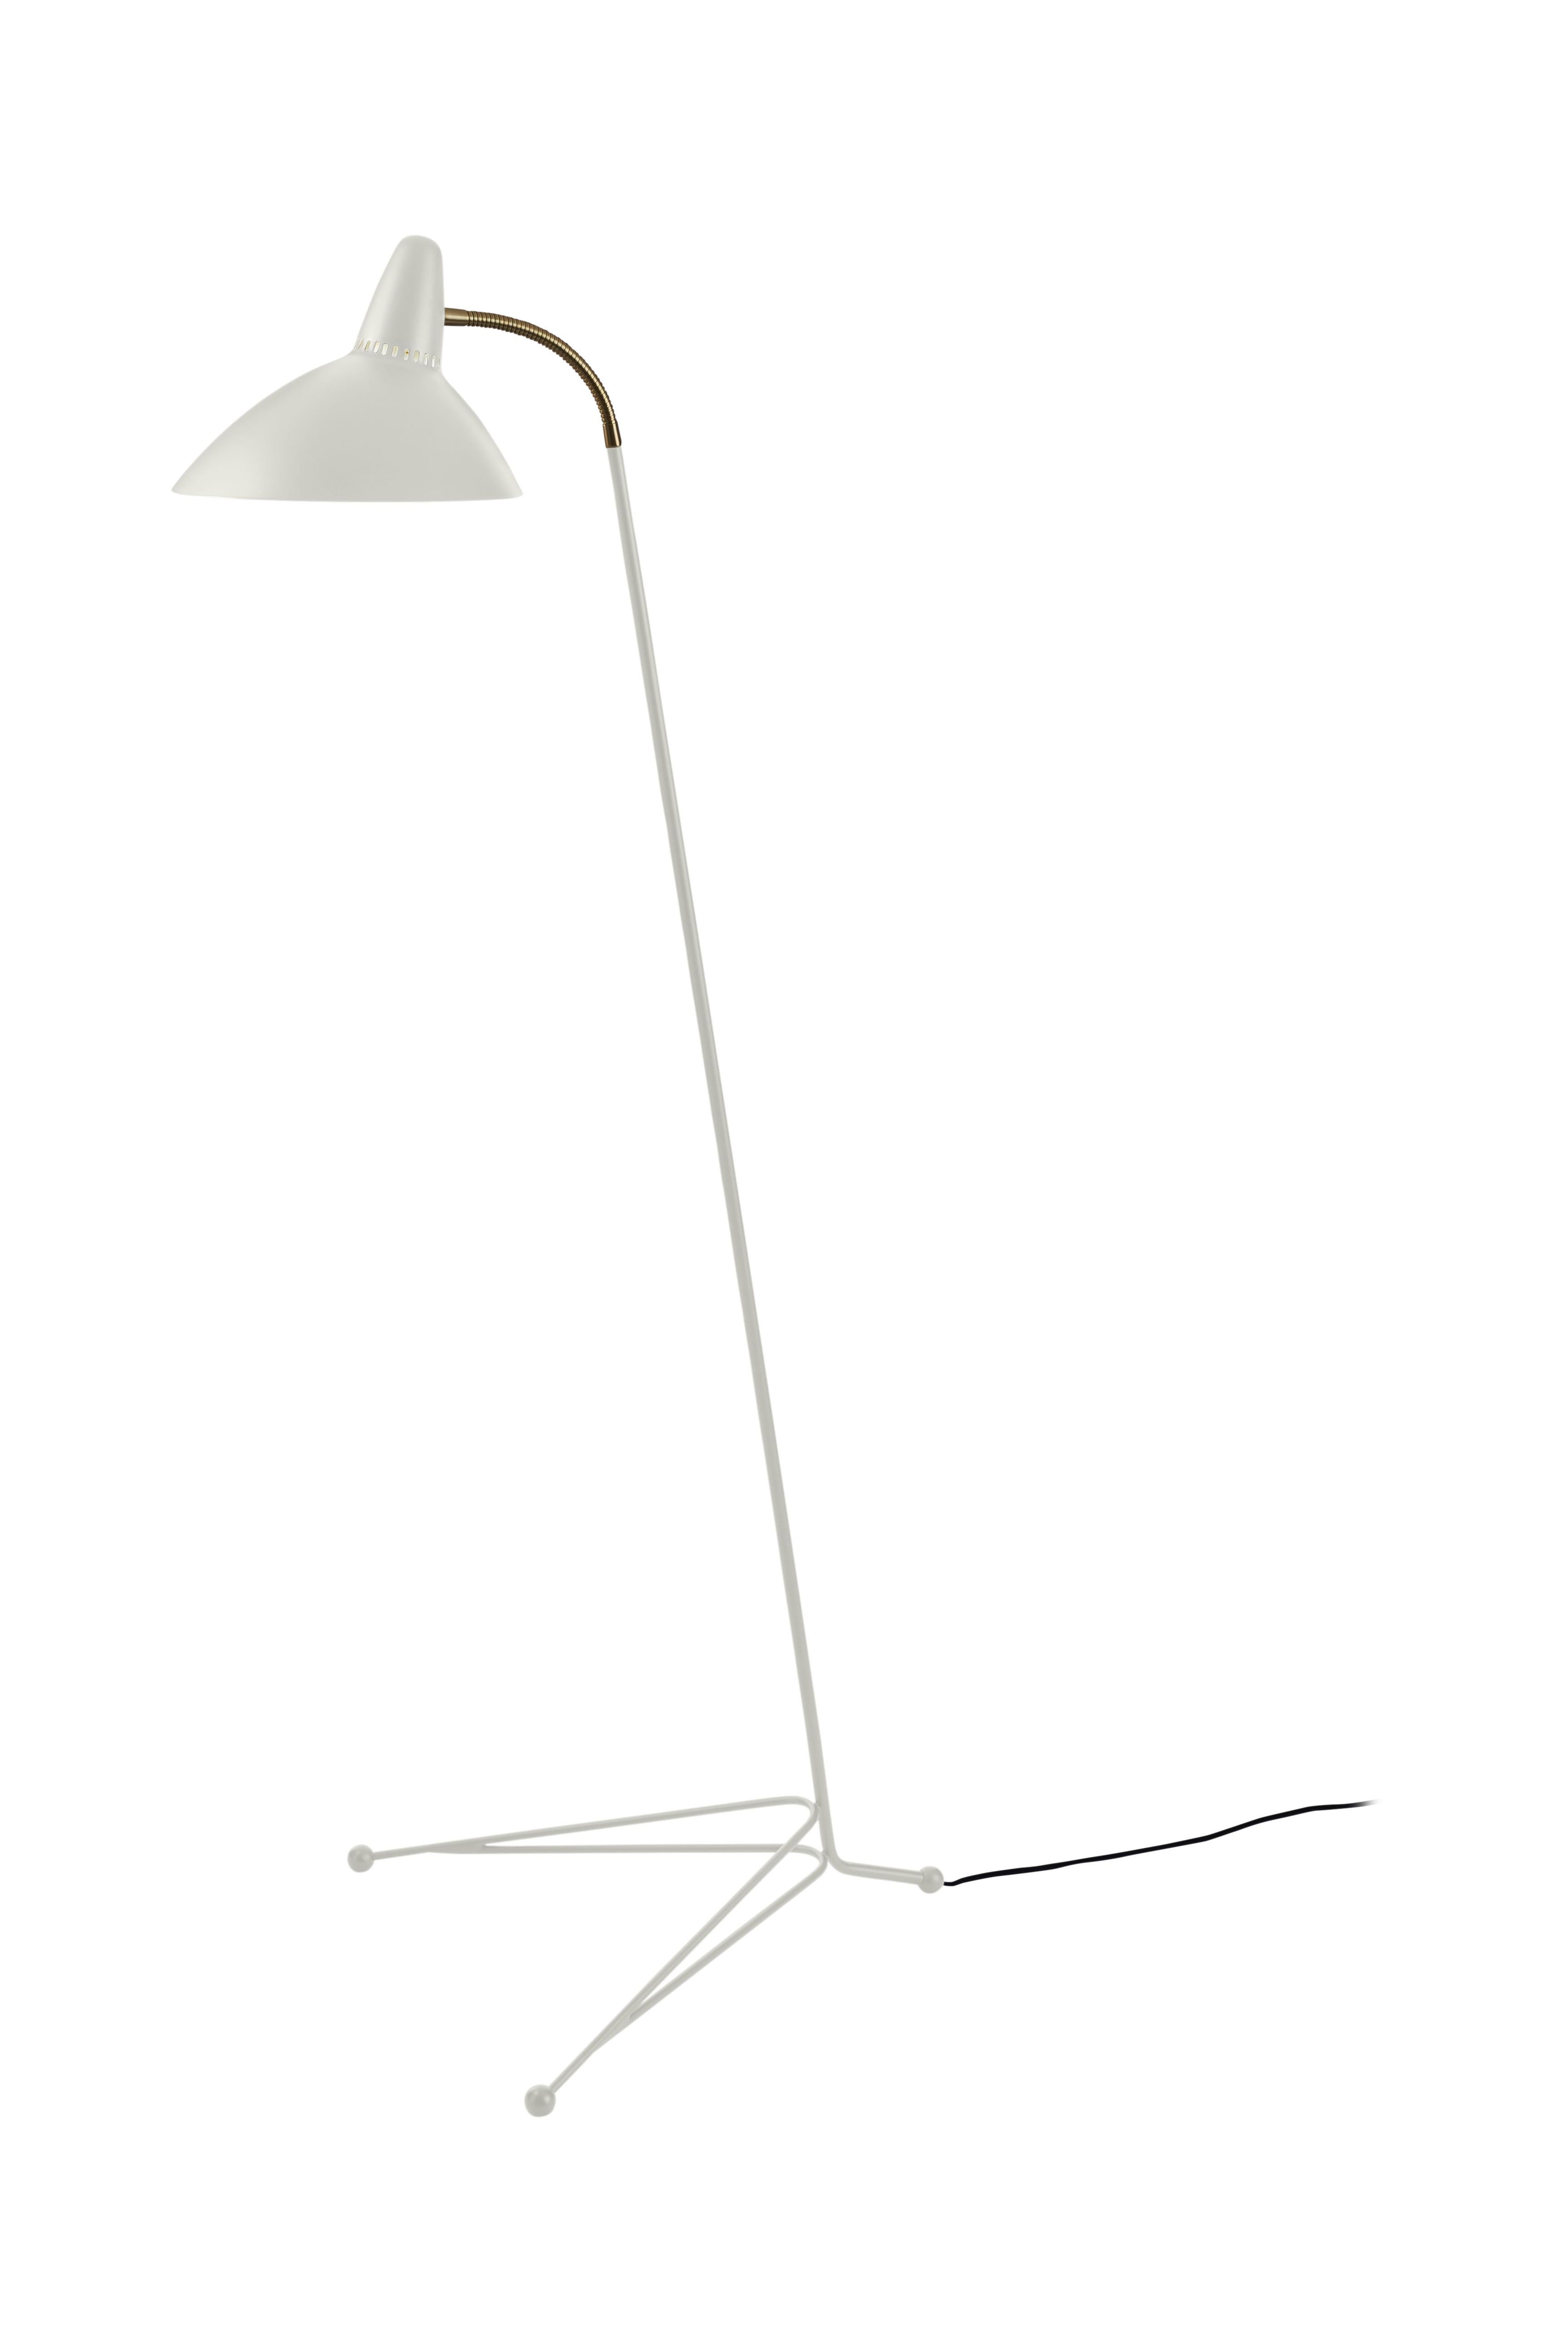 For Sale: White (Warm White) Lightsome Floor Lamp, by Svend Aage Holm Sorensen from Warm Nordic